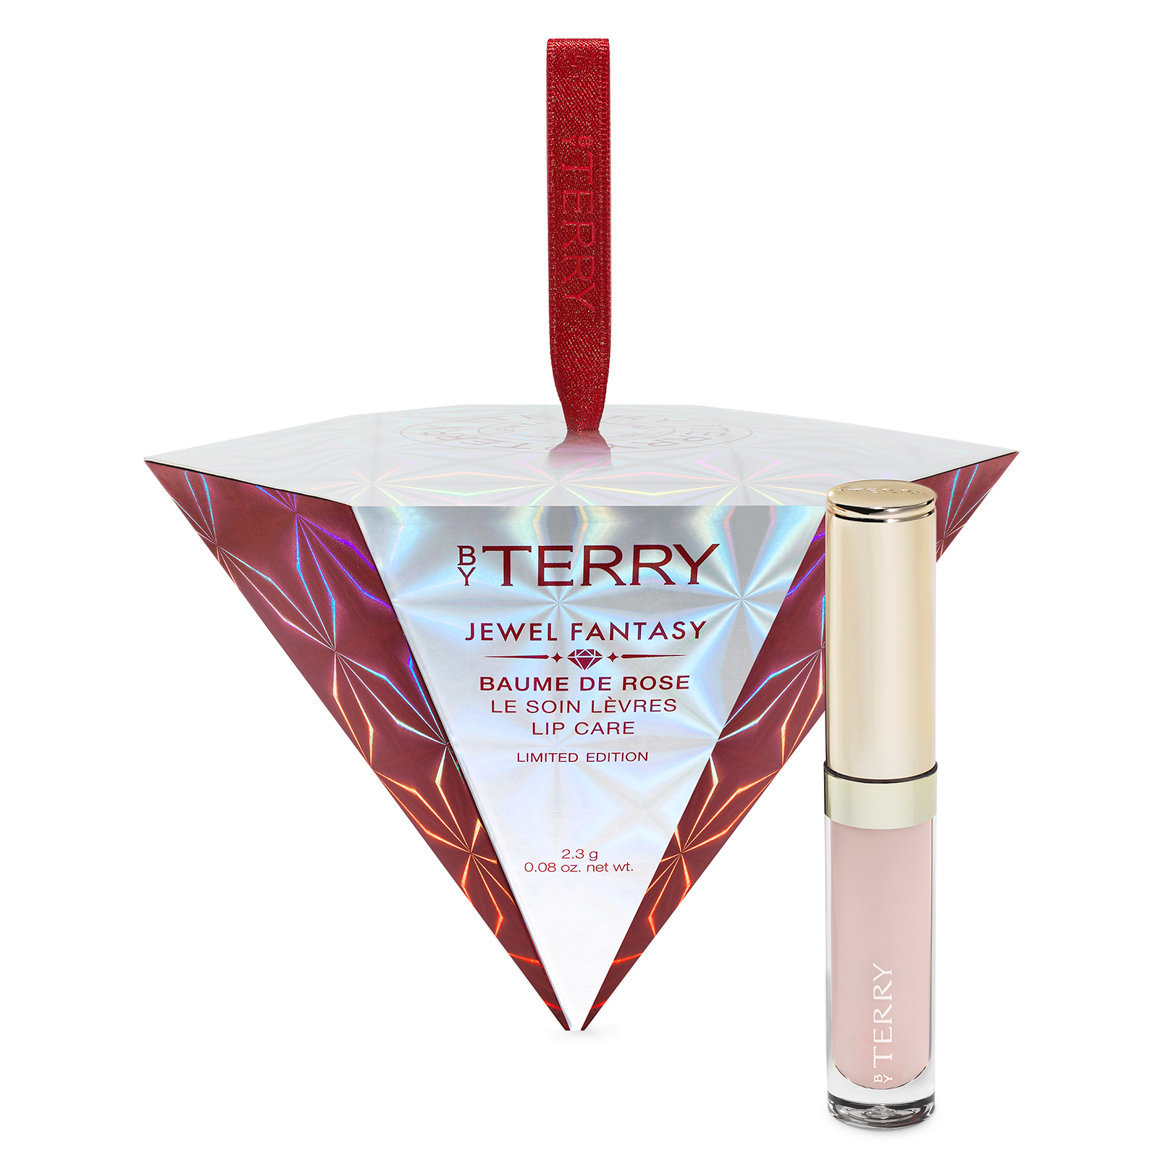 BY TERRY Jewel Fantasy Tree Deco Baume de Rose Lip Care alternative view 1 - product swatch.